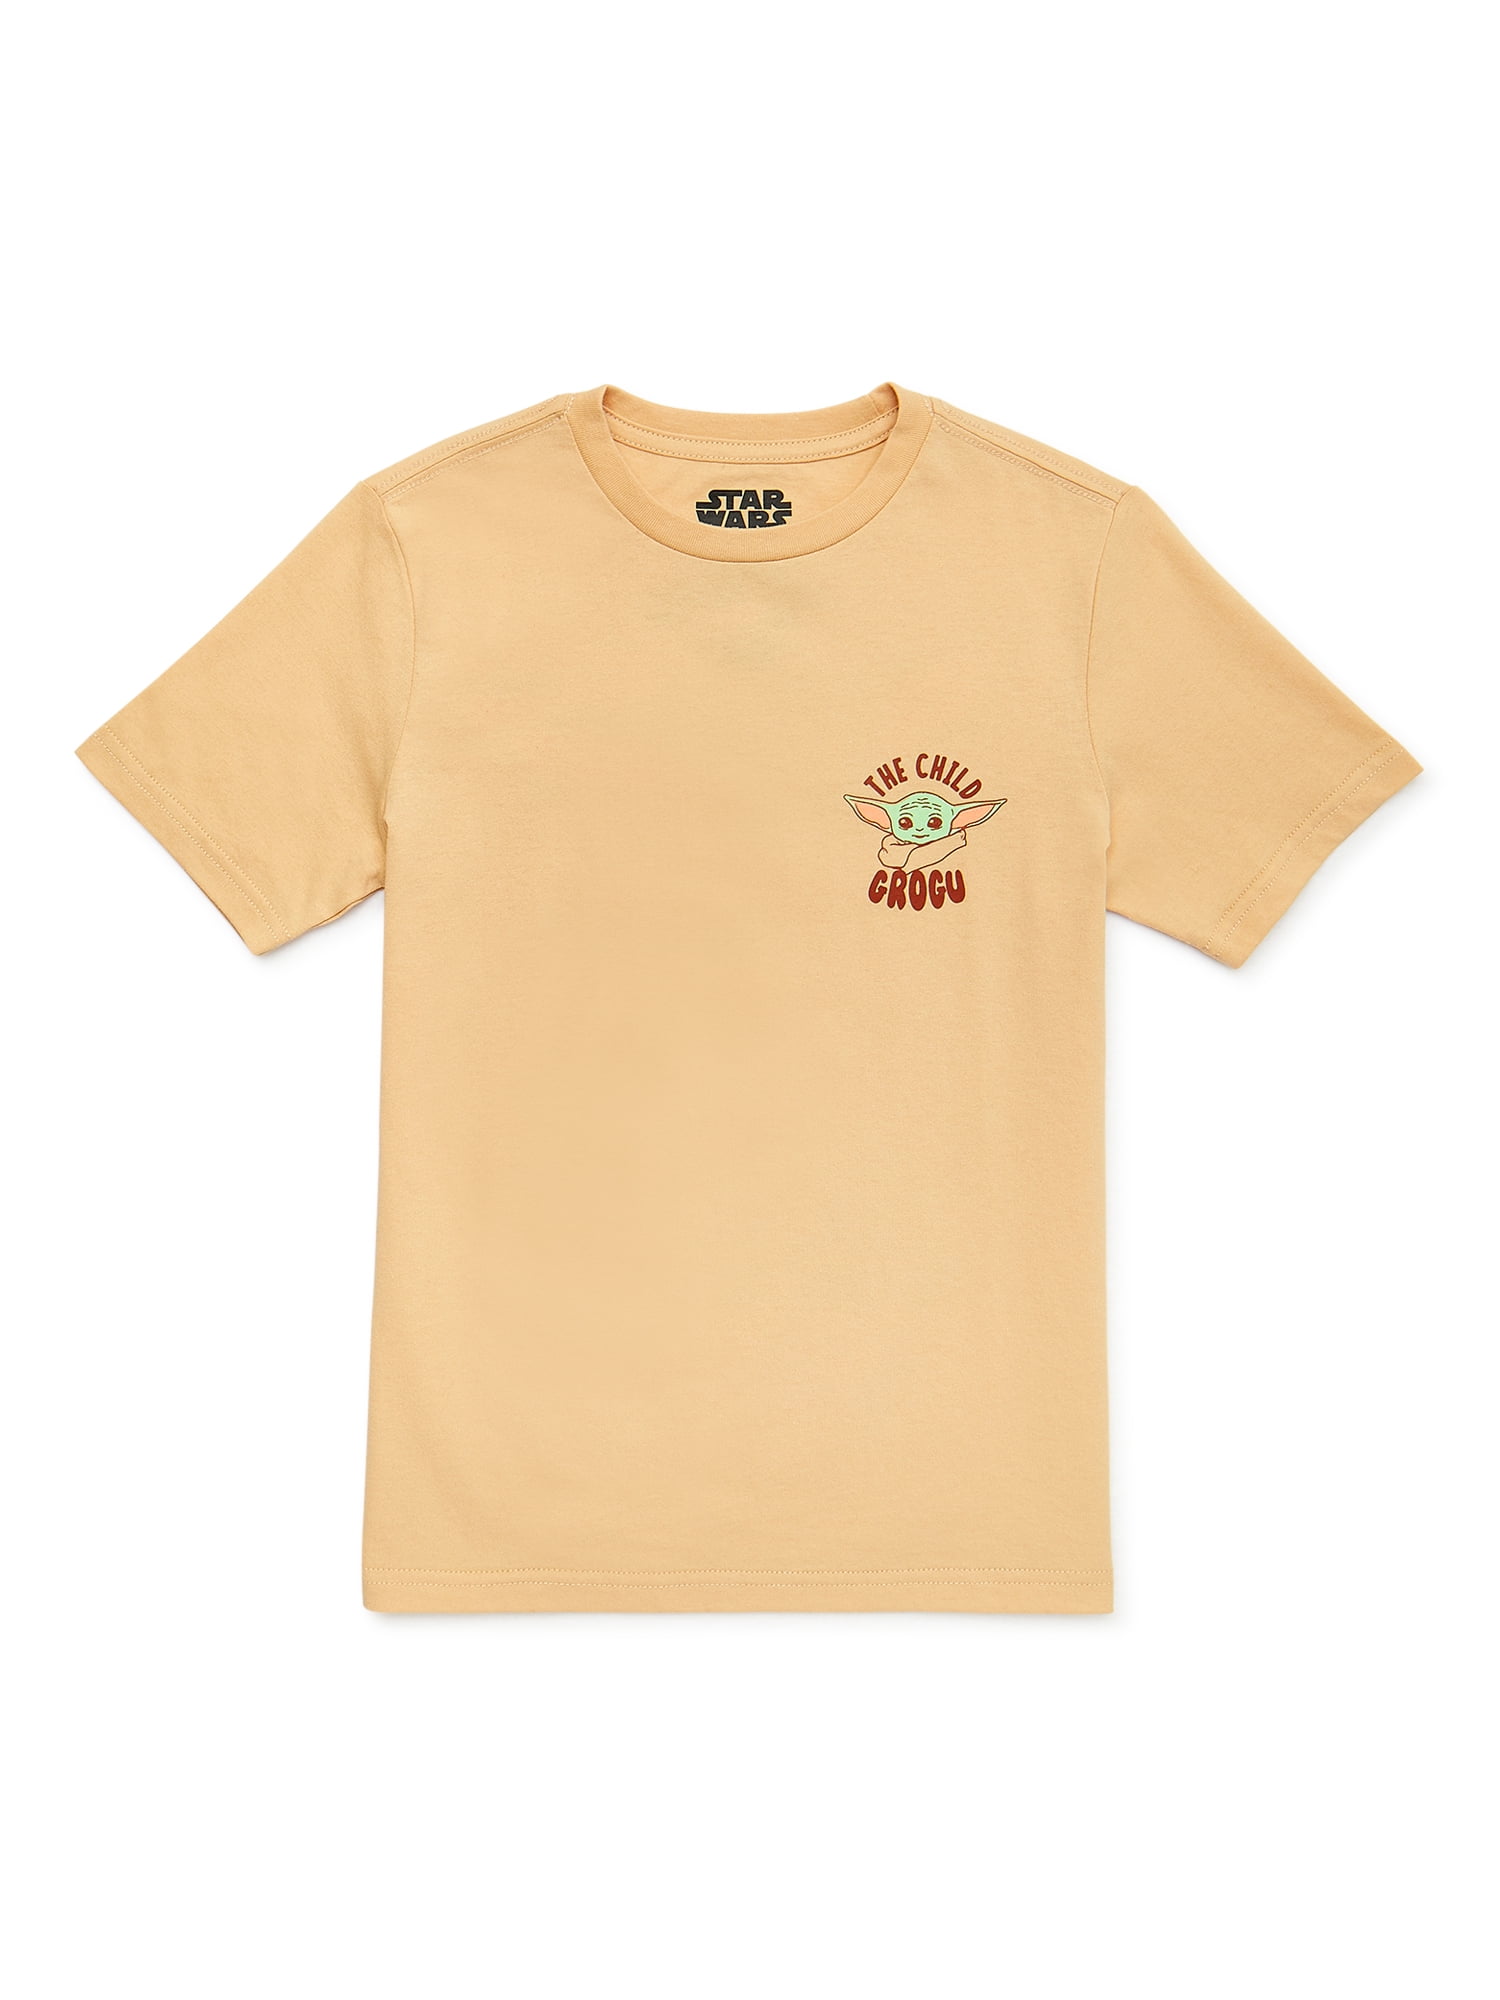 Grogu Boys The Child T-Shirt with Short Sleeves, Sizes 4-18